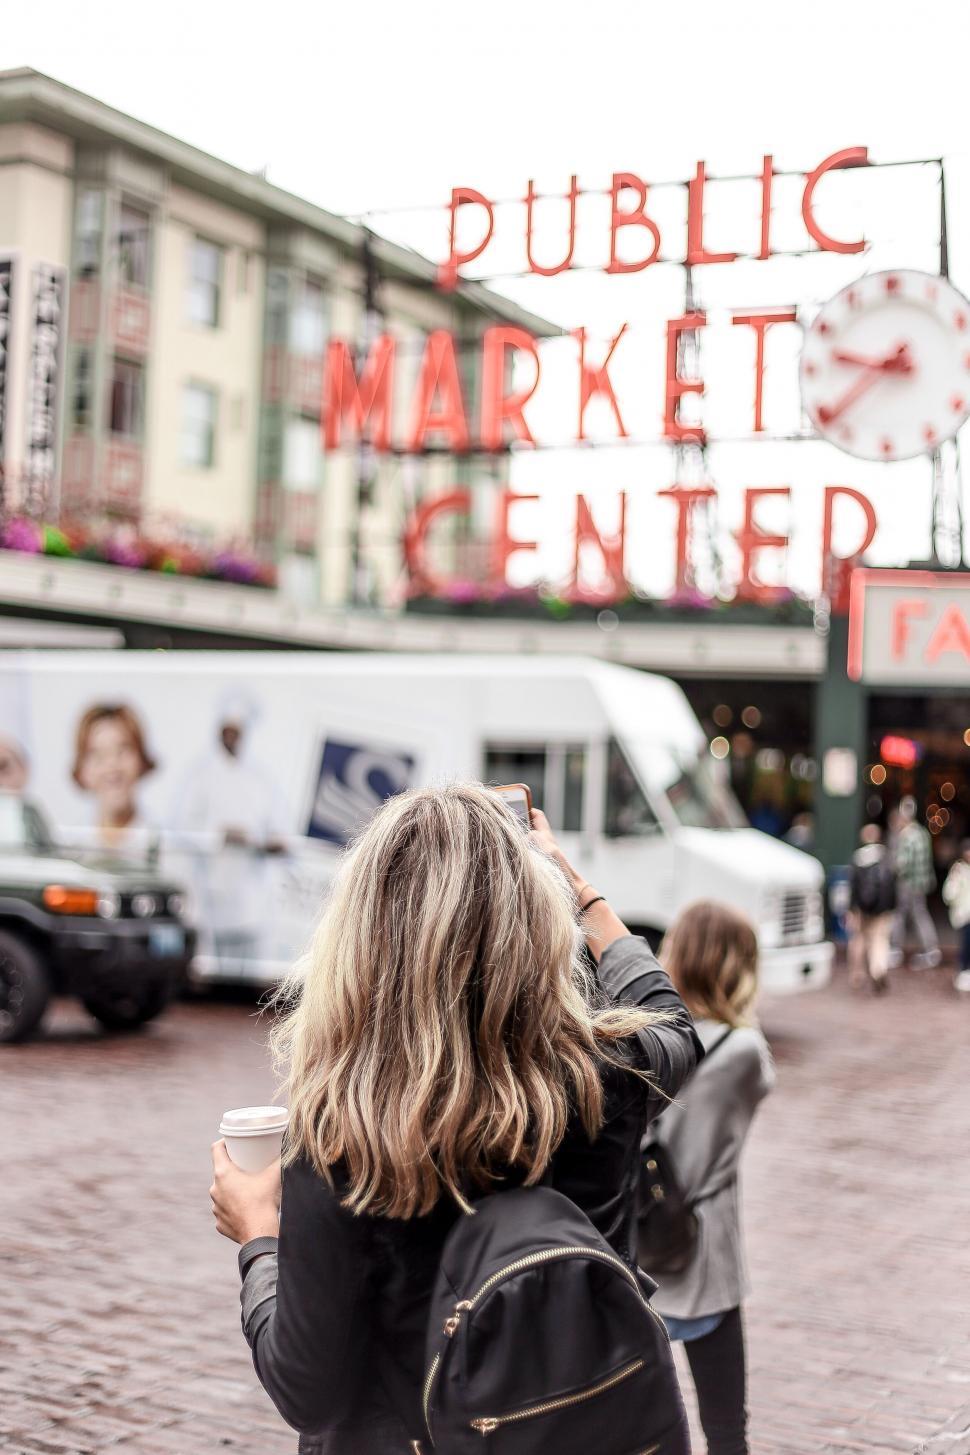 Free Image of Woman capturing market s sign with smartphone 